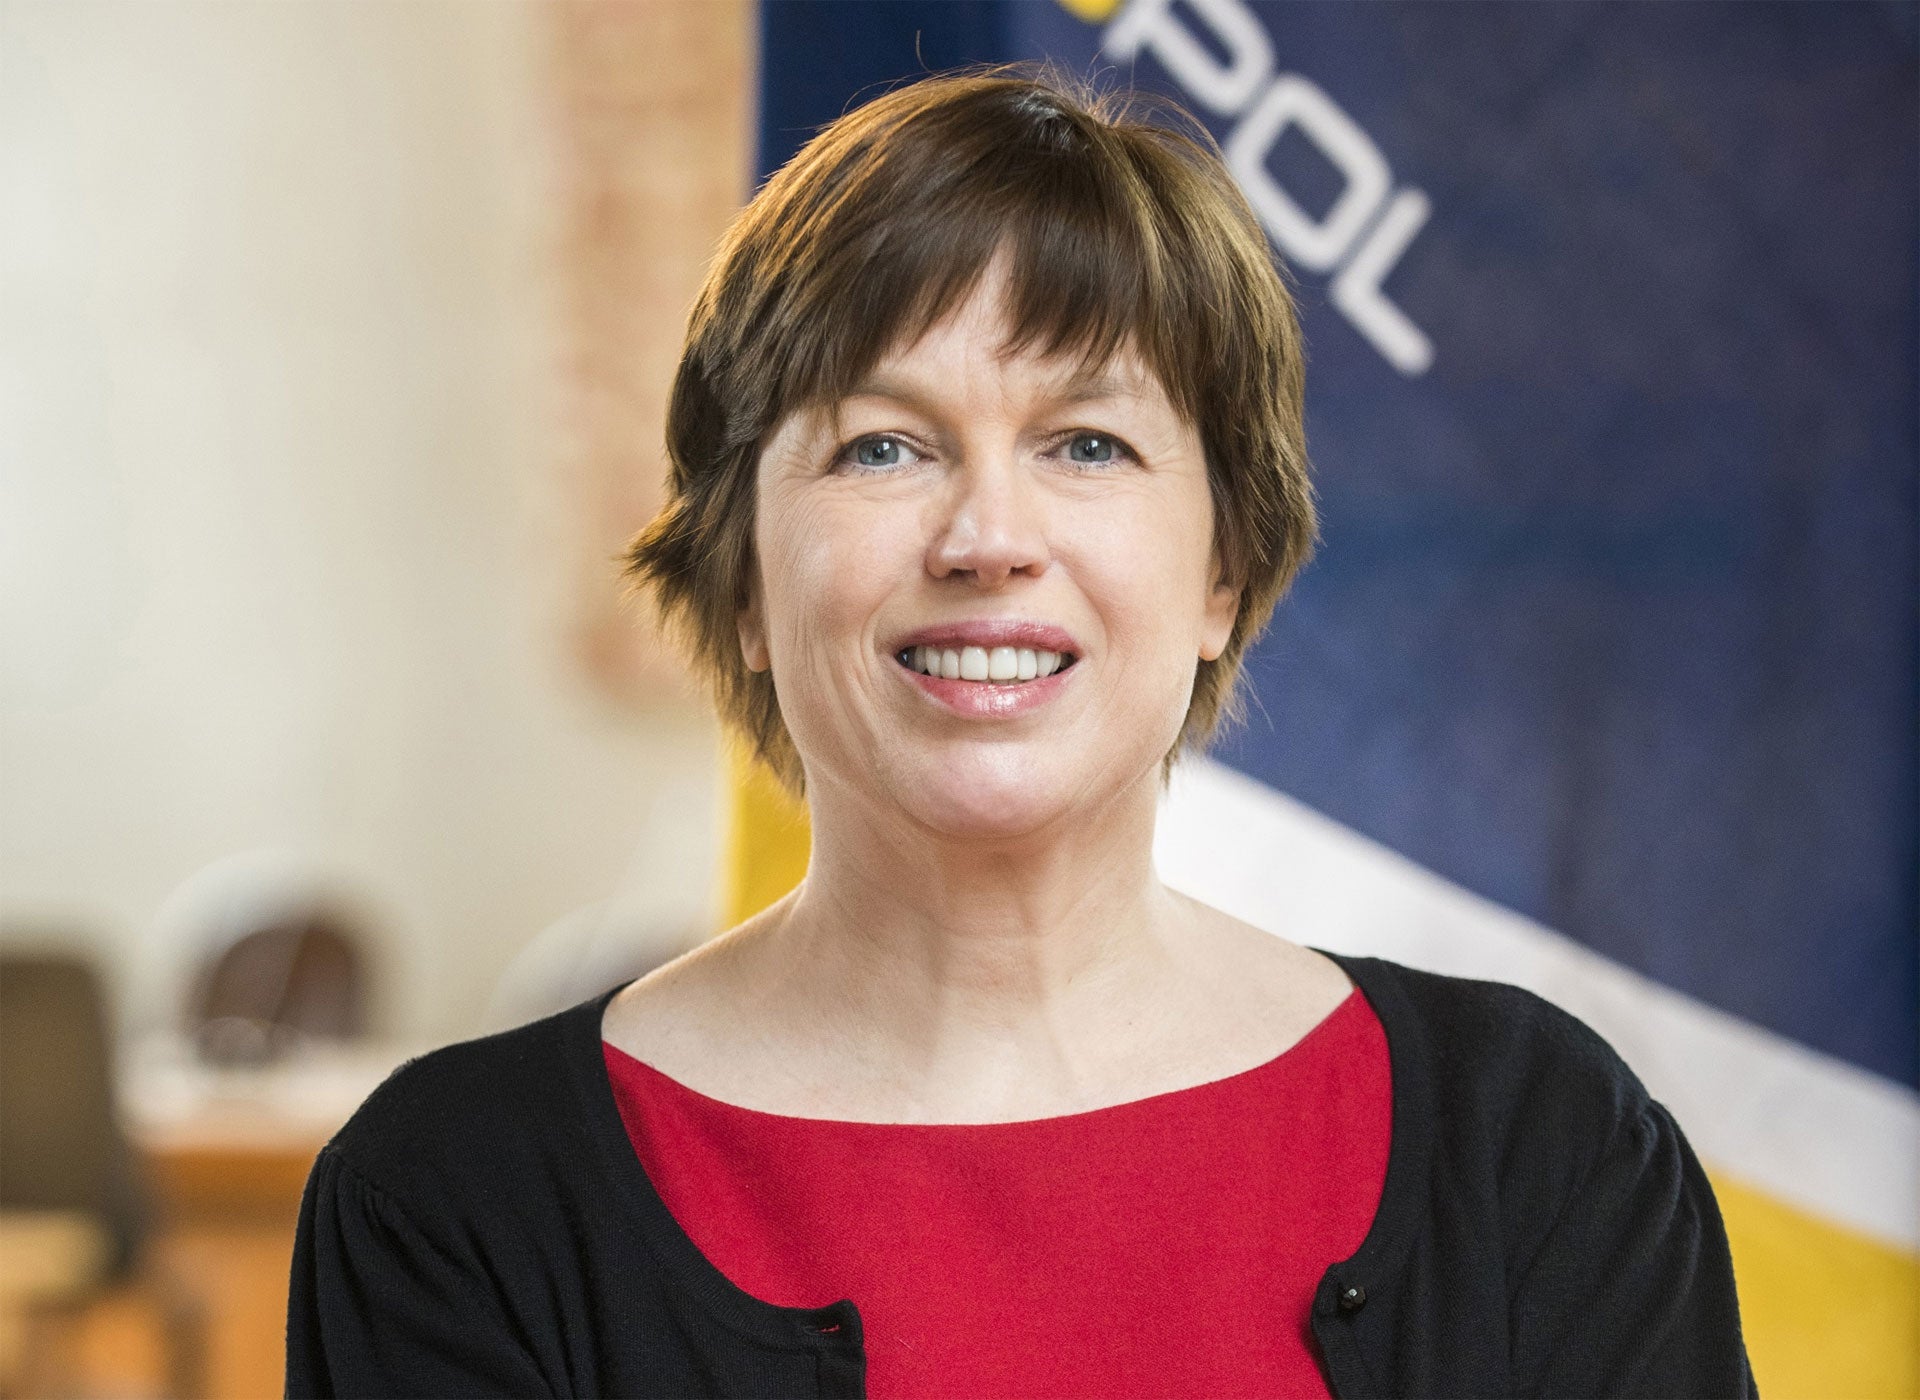 Europol executive director Catherine De Bolle on cybercrime and the private sector